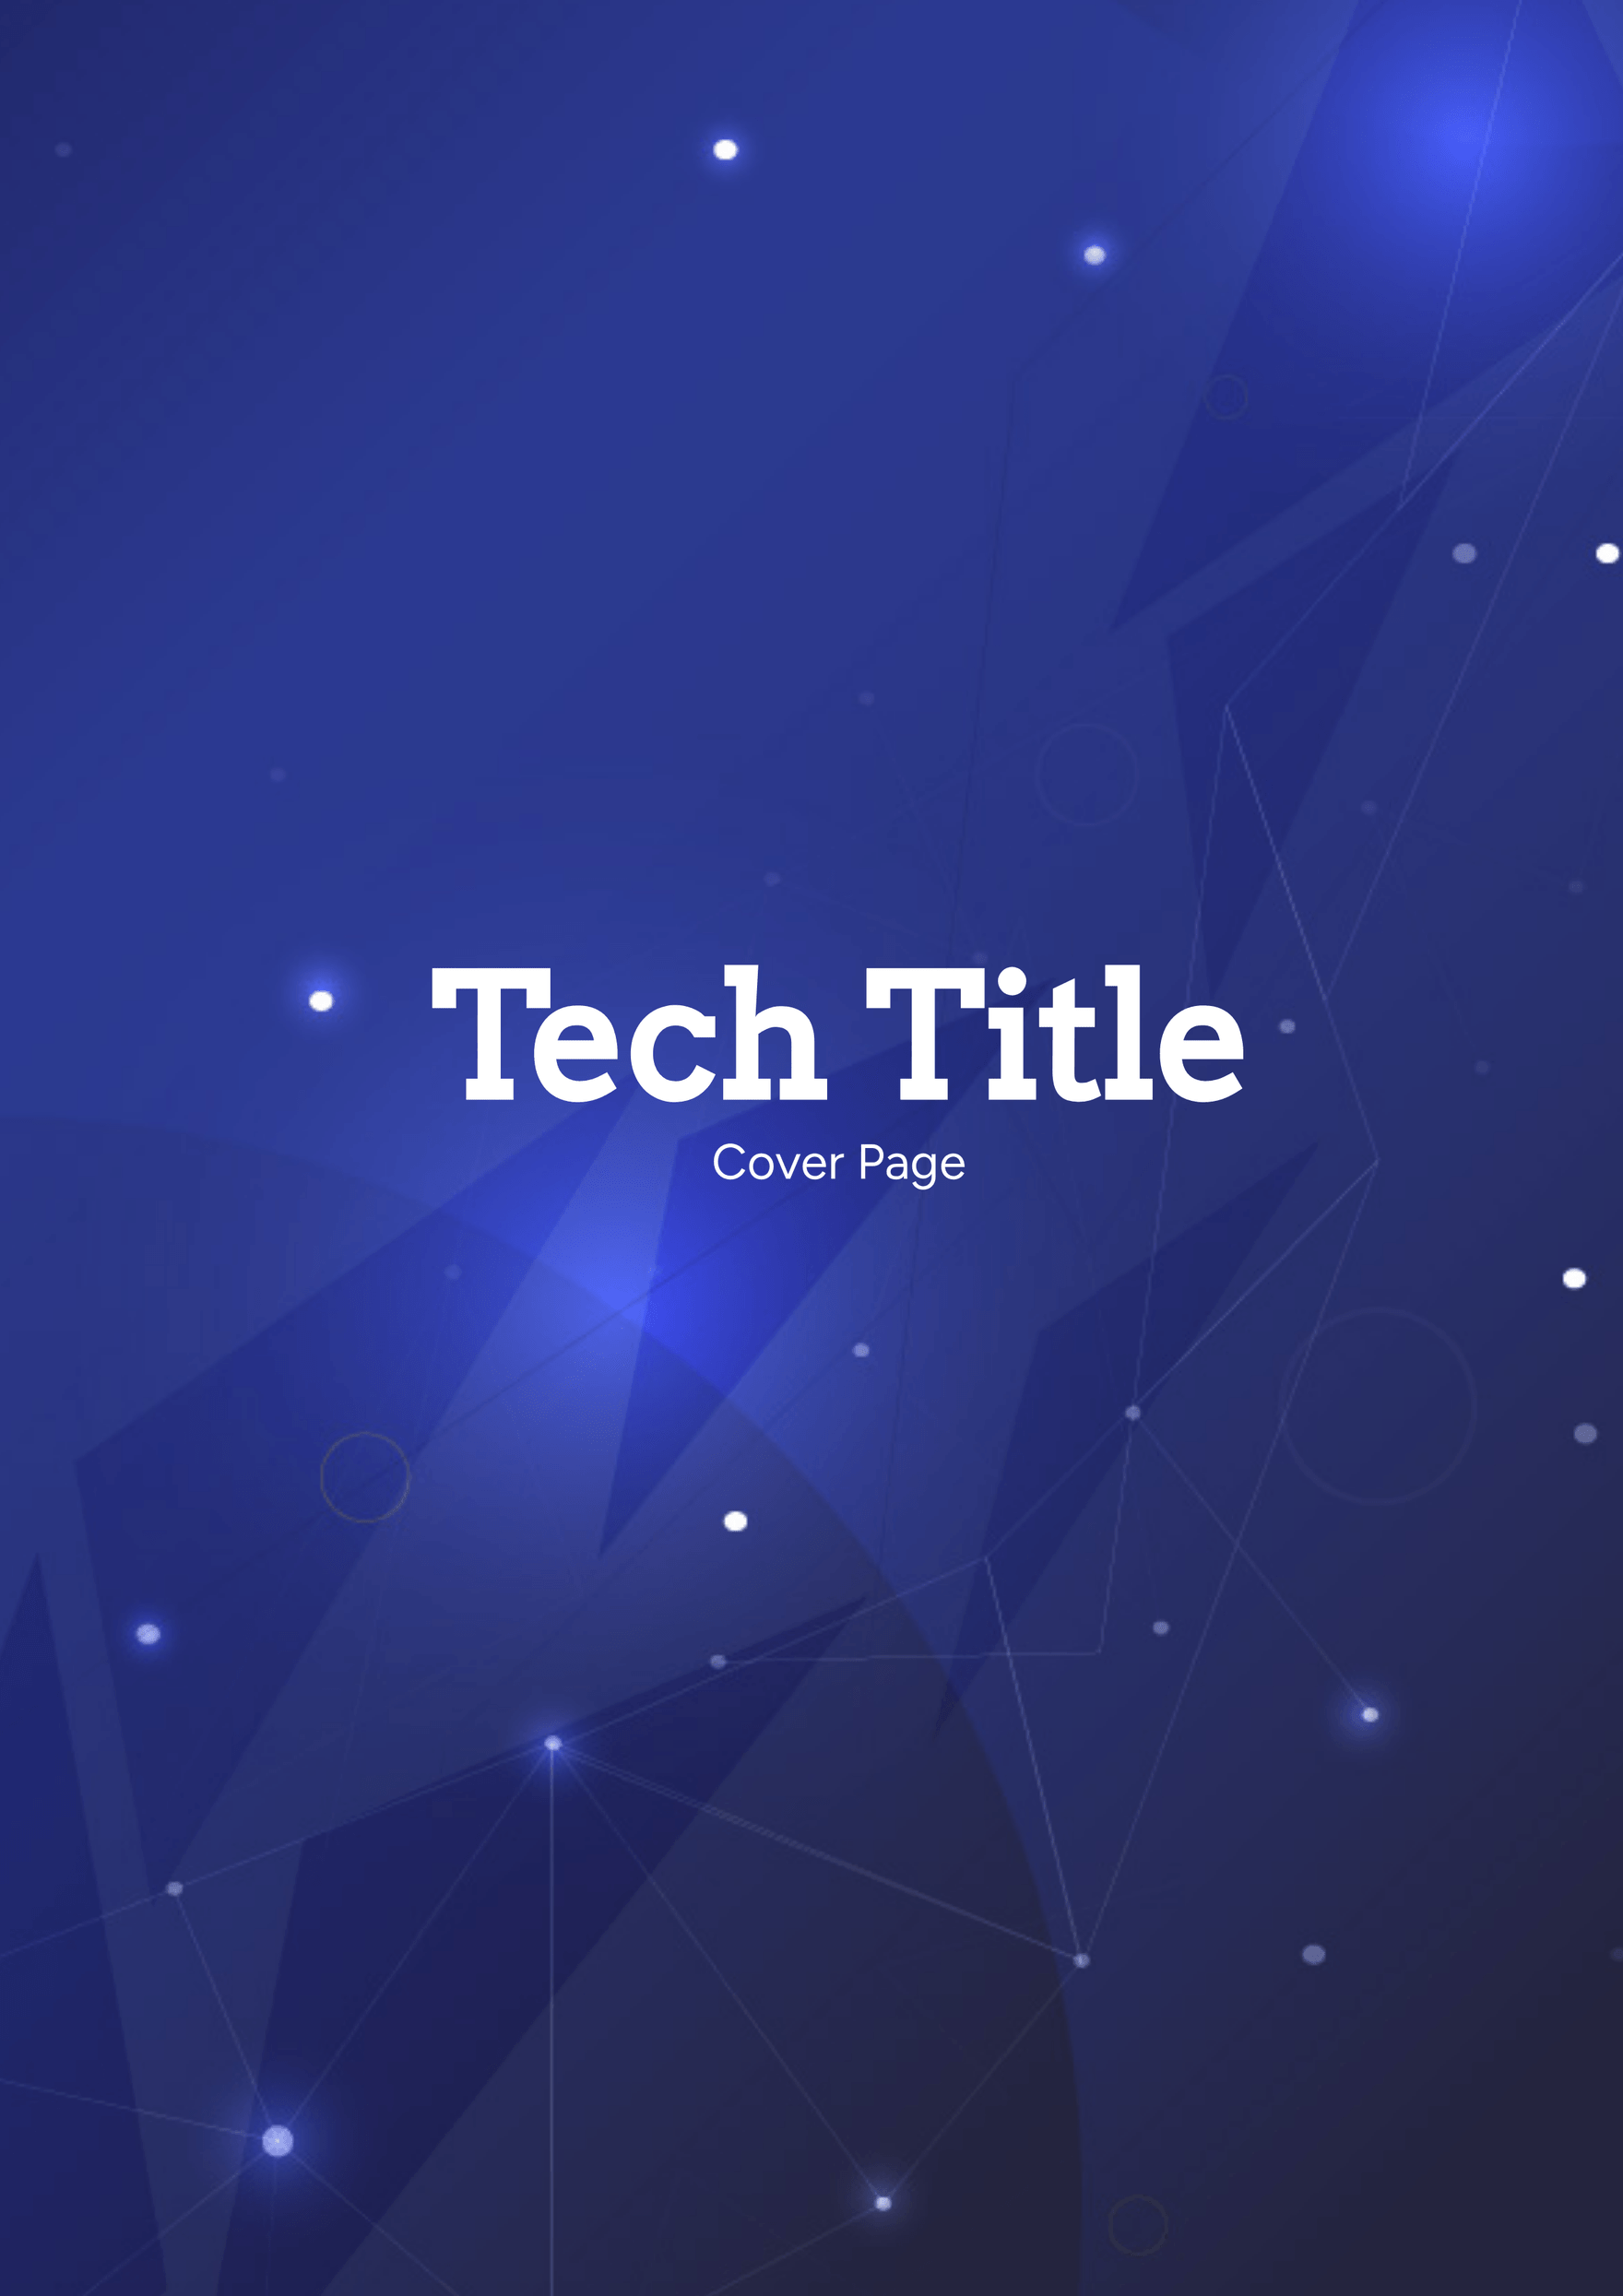 Tech Title Cover Page Template